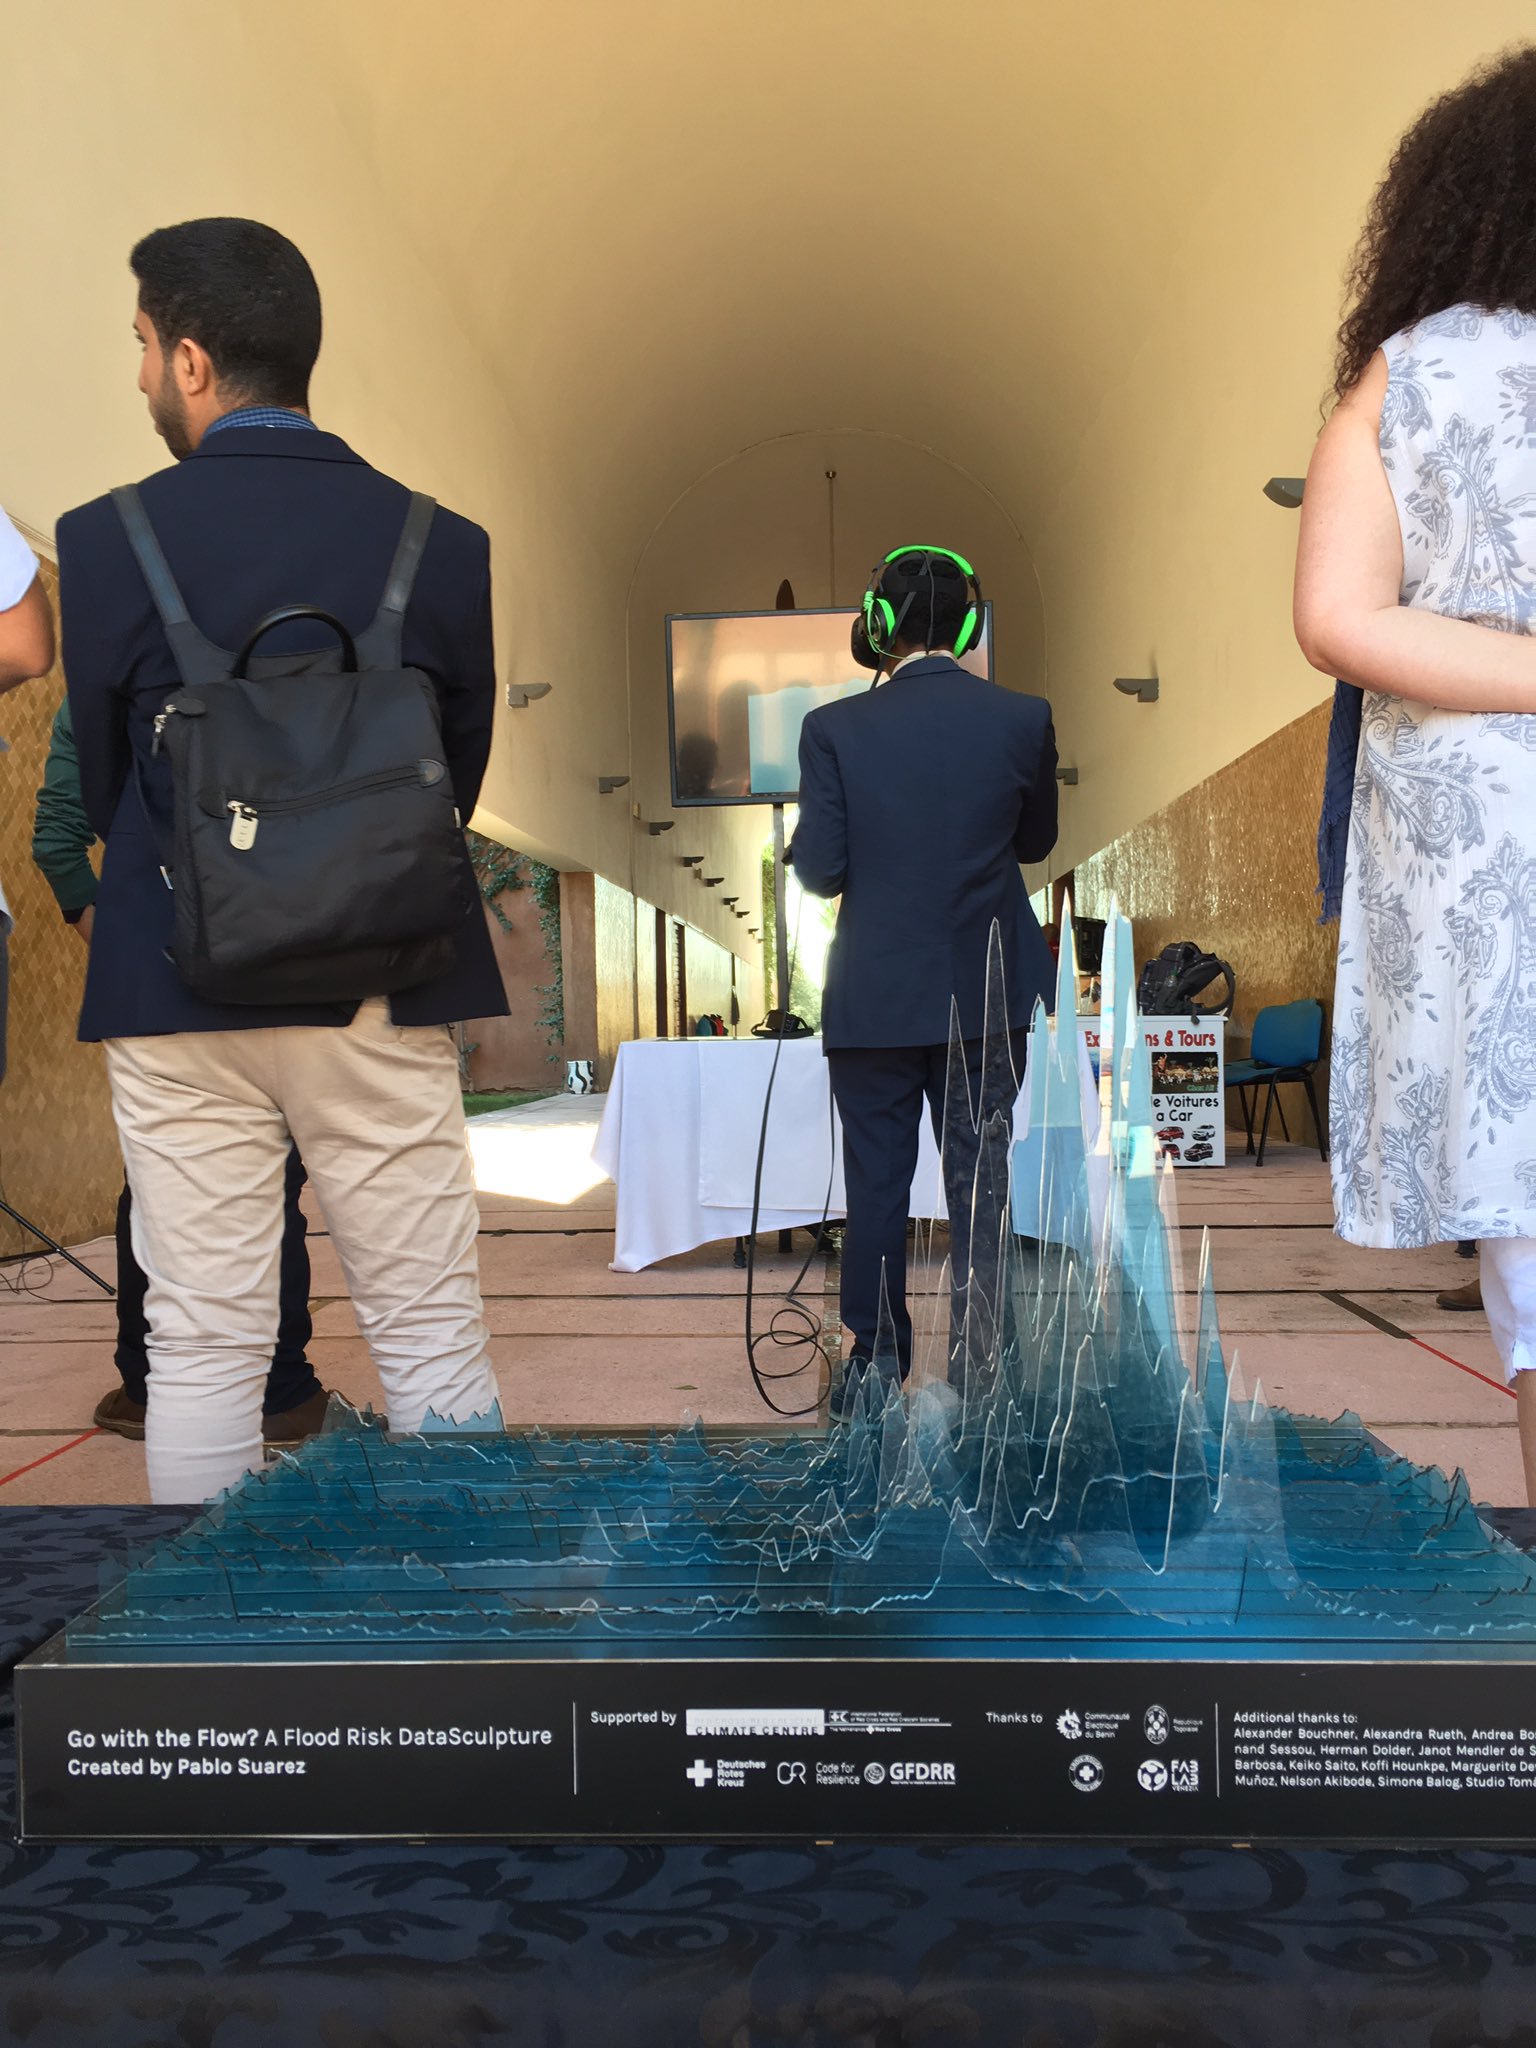 Demonstrating the use of virtual reality in climate communications @RCClimate @GFDRR #DCdays https://t.co/FZO5LkhpE3